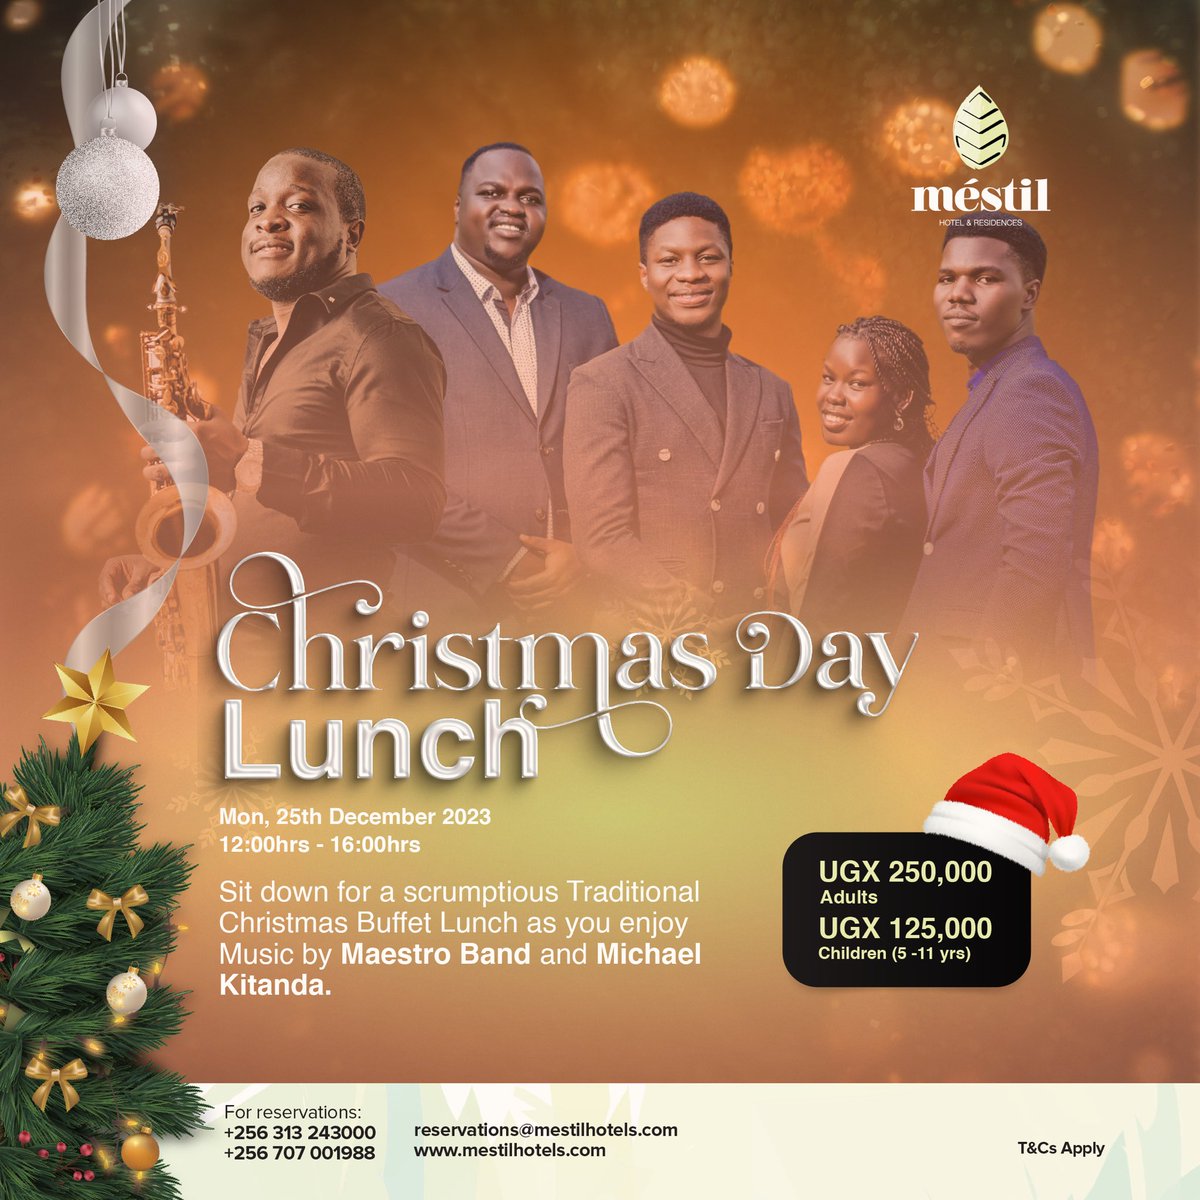 Jingle all the way to a delicious Christmas feast! ✨ Unwrap a scrumptious Traditional Christmas Buffet: roast turkey & trimmings, festive treats, exotic drinks & Christmas pudding! Get groovin' to @maestrobandug & @MichealKitanda 's merry tunes!